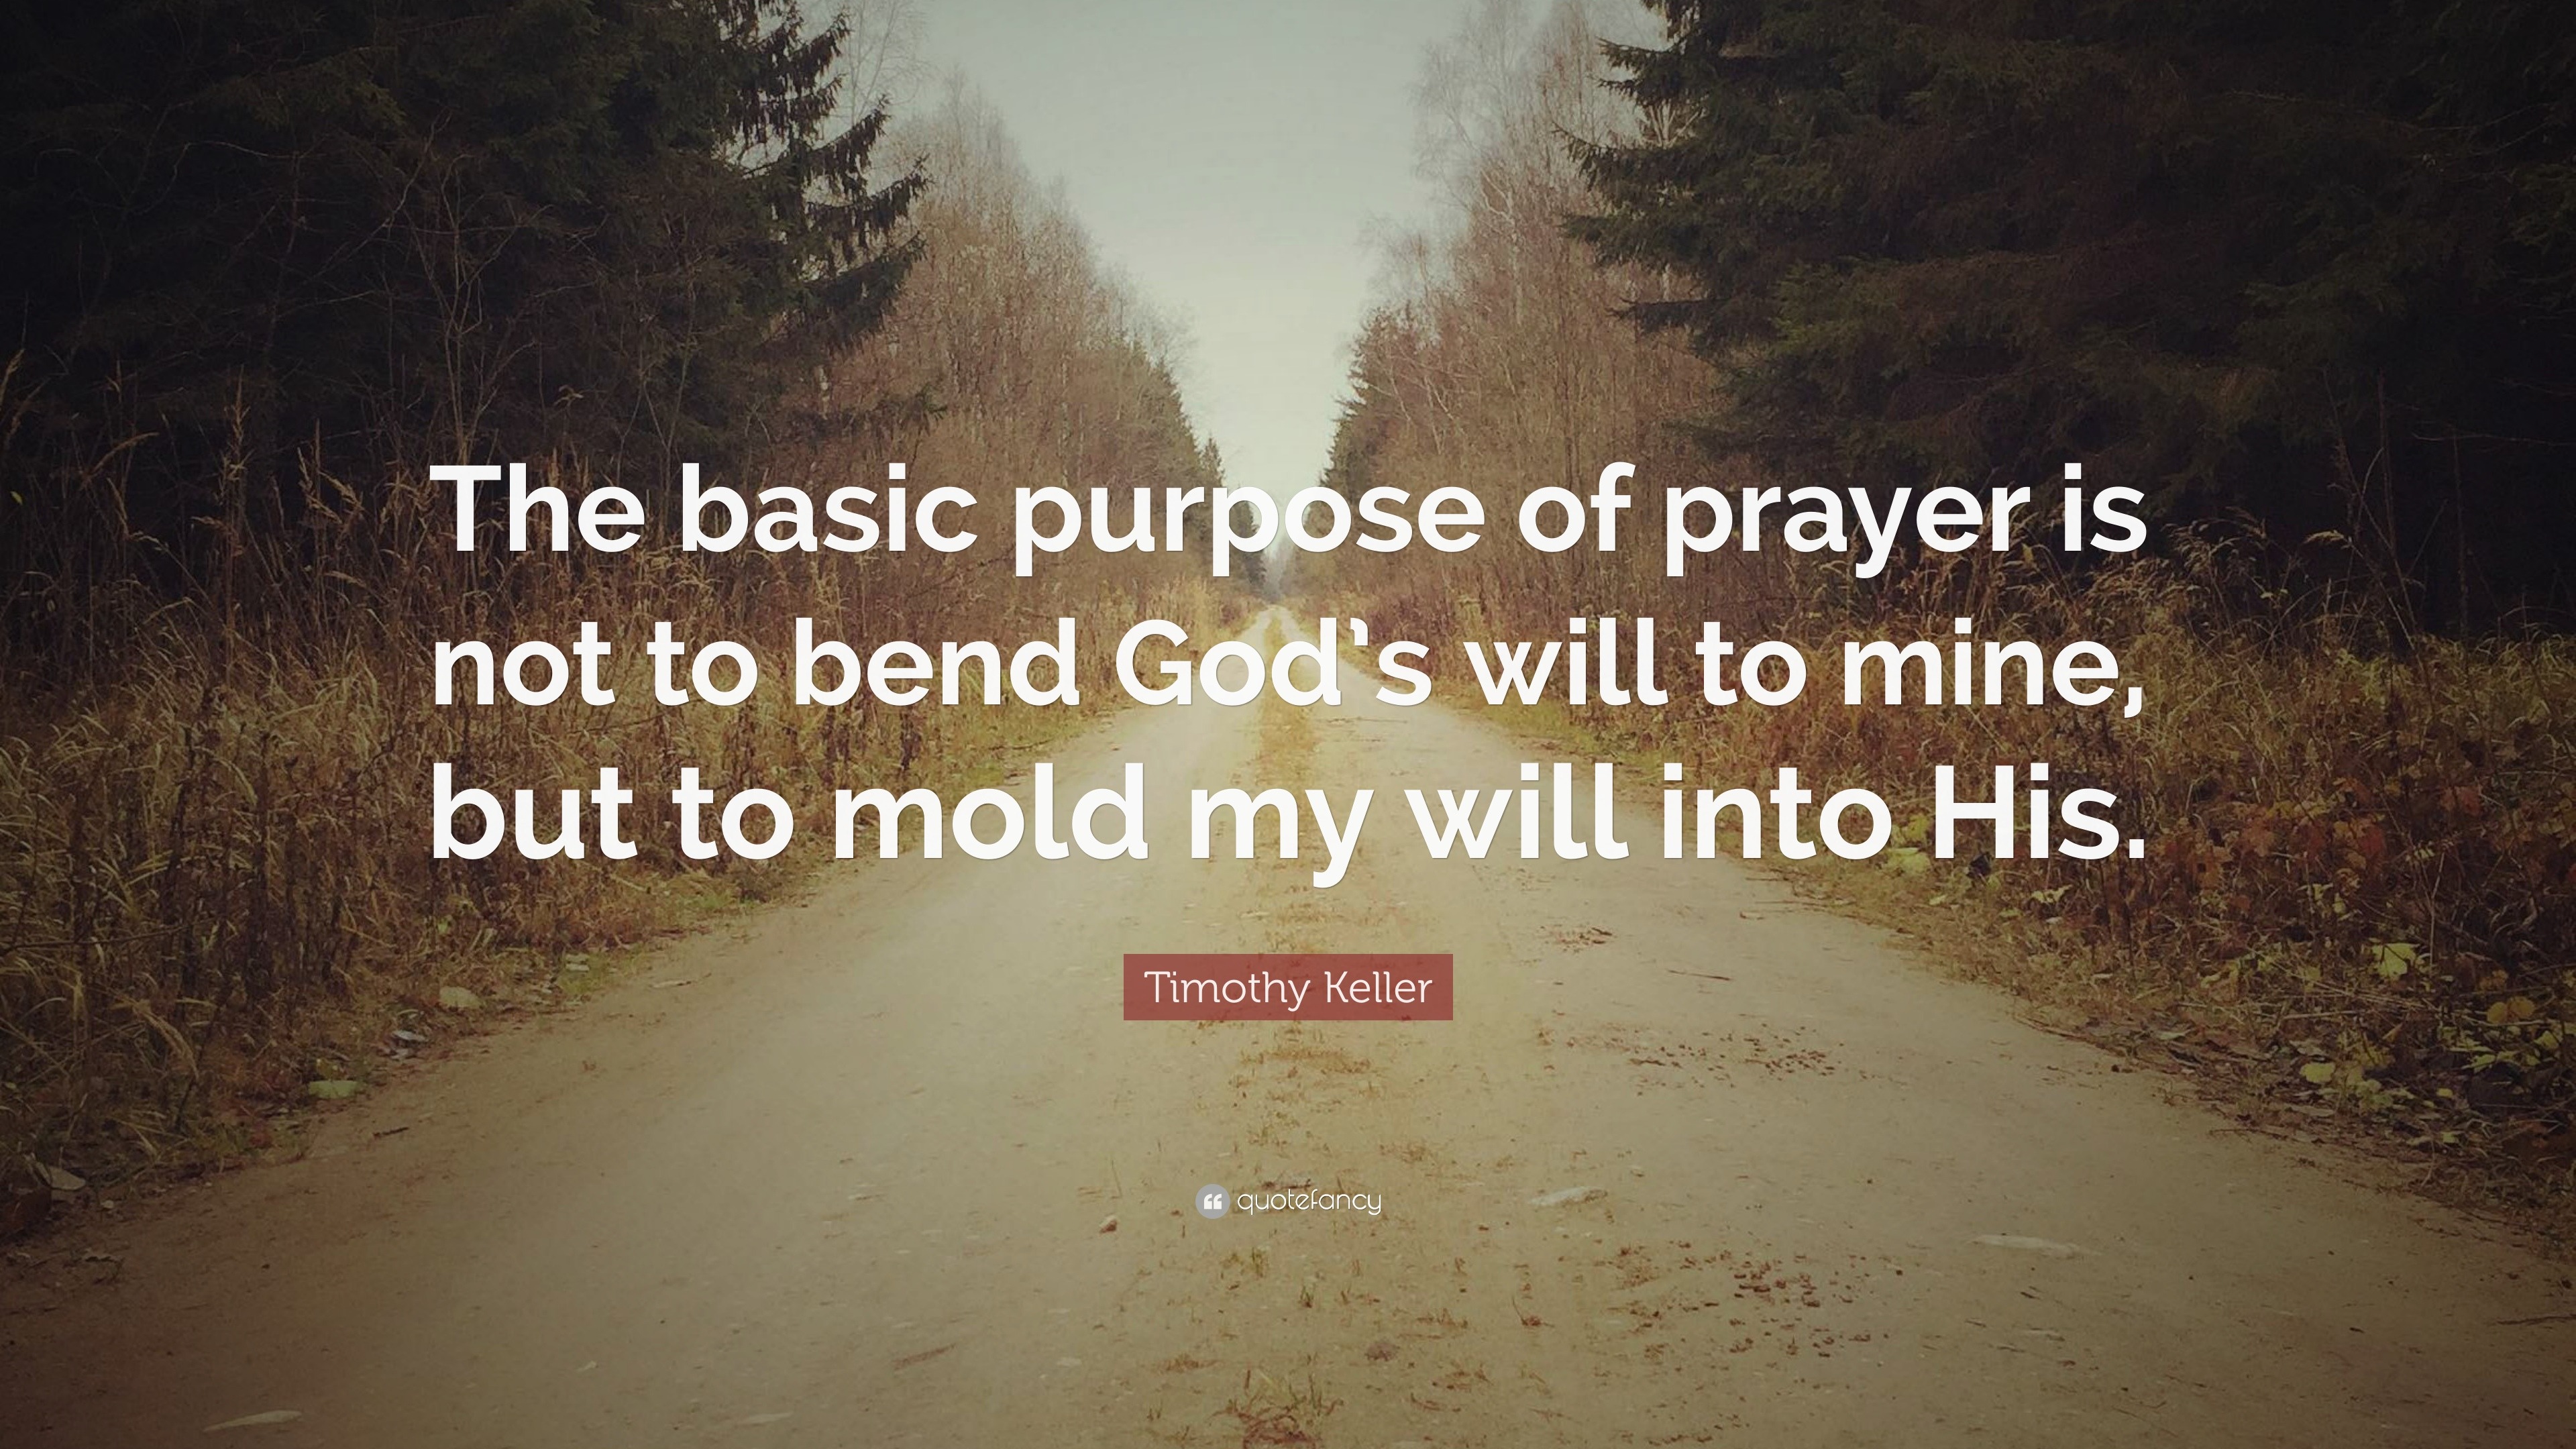 Timothy Keller Quote: “The basic purpose of prayer is not to bend God&#39;s  will to mine,